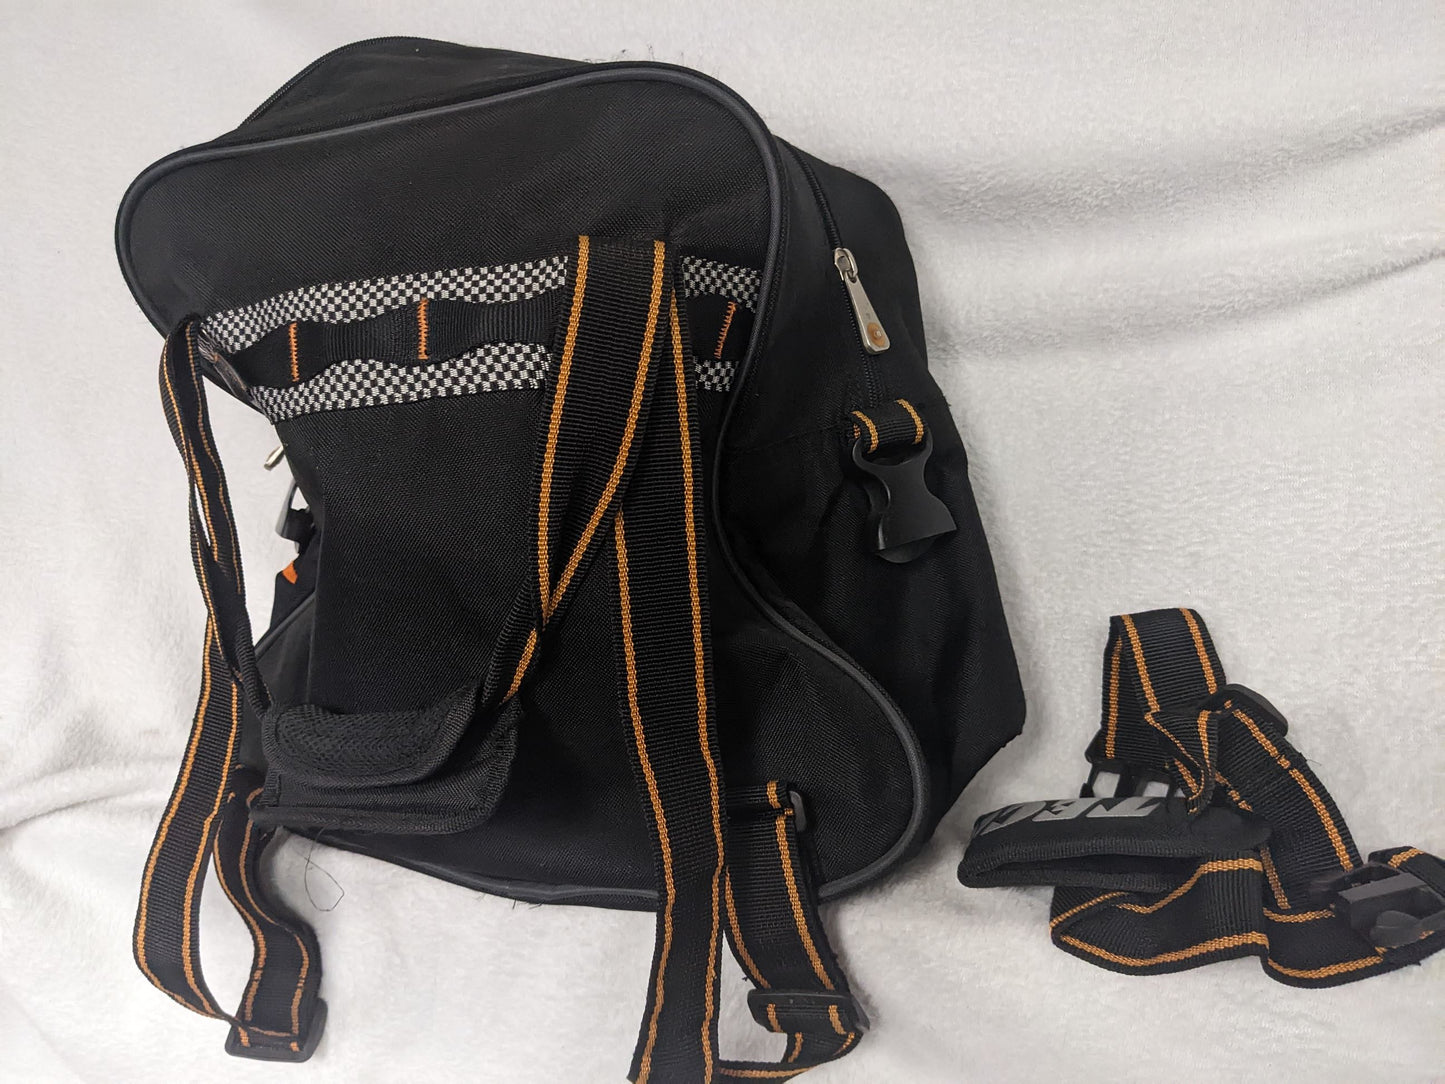 Tecnica Ski Boot Bag w/Shoulder and Backpack Straps Size 16 In x 14 In x 9 In Color Black Condition Used